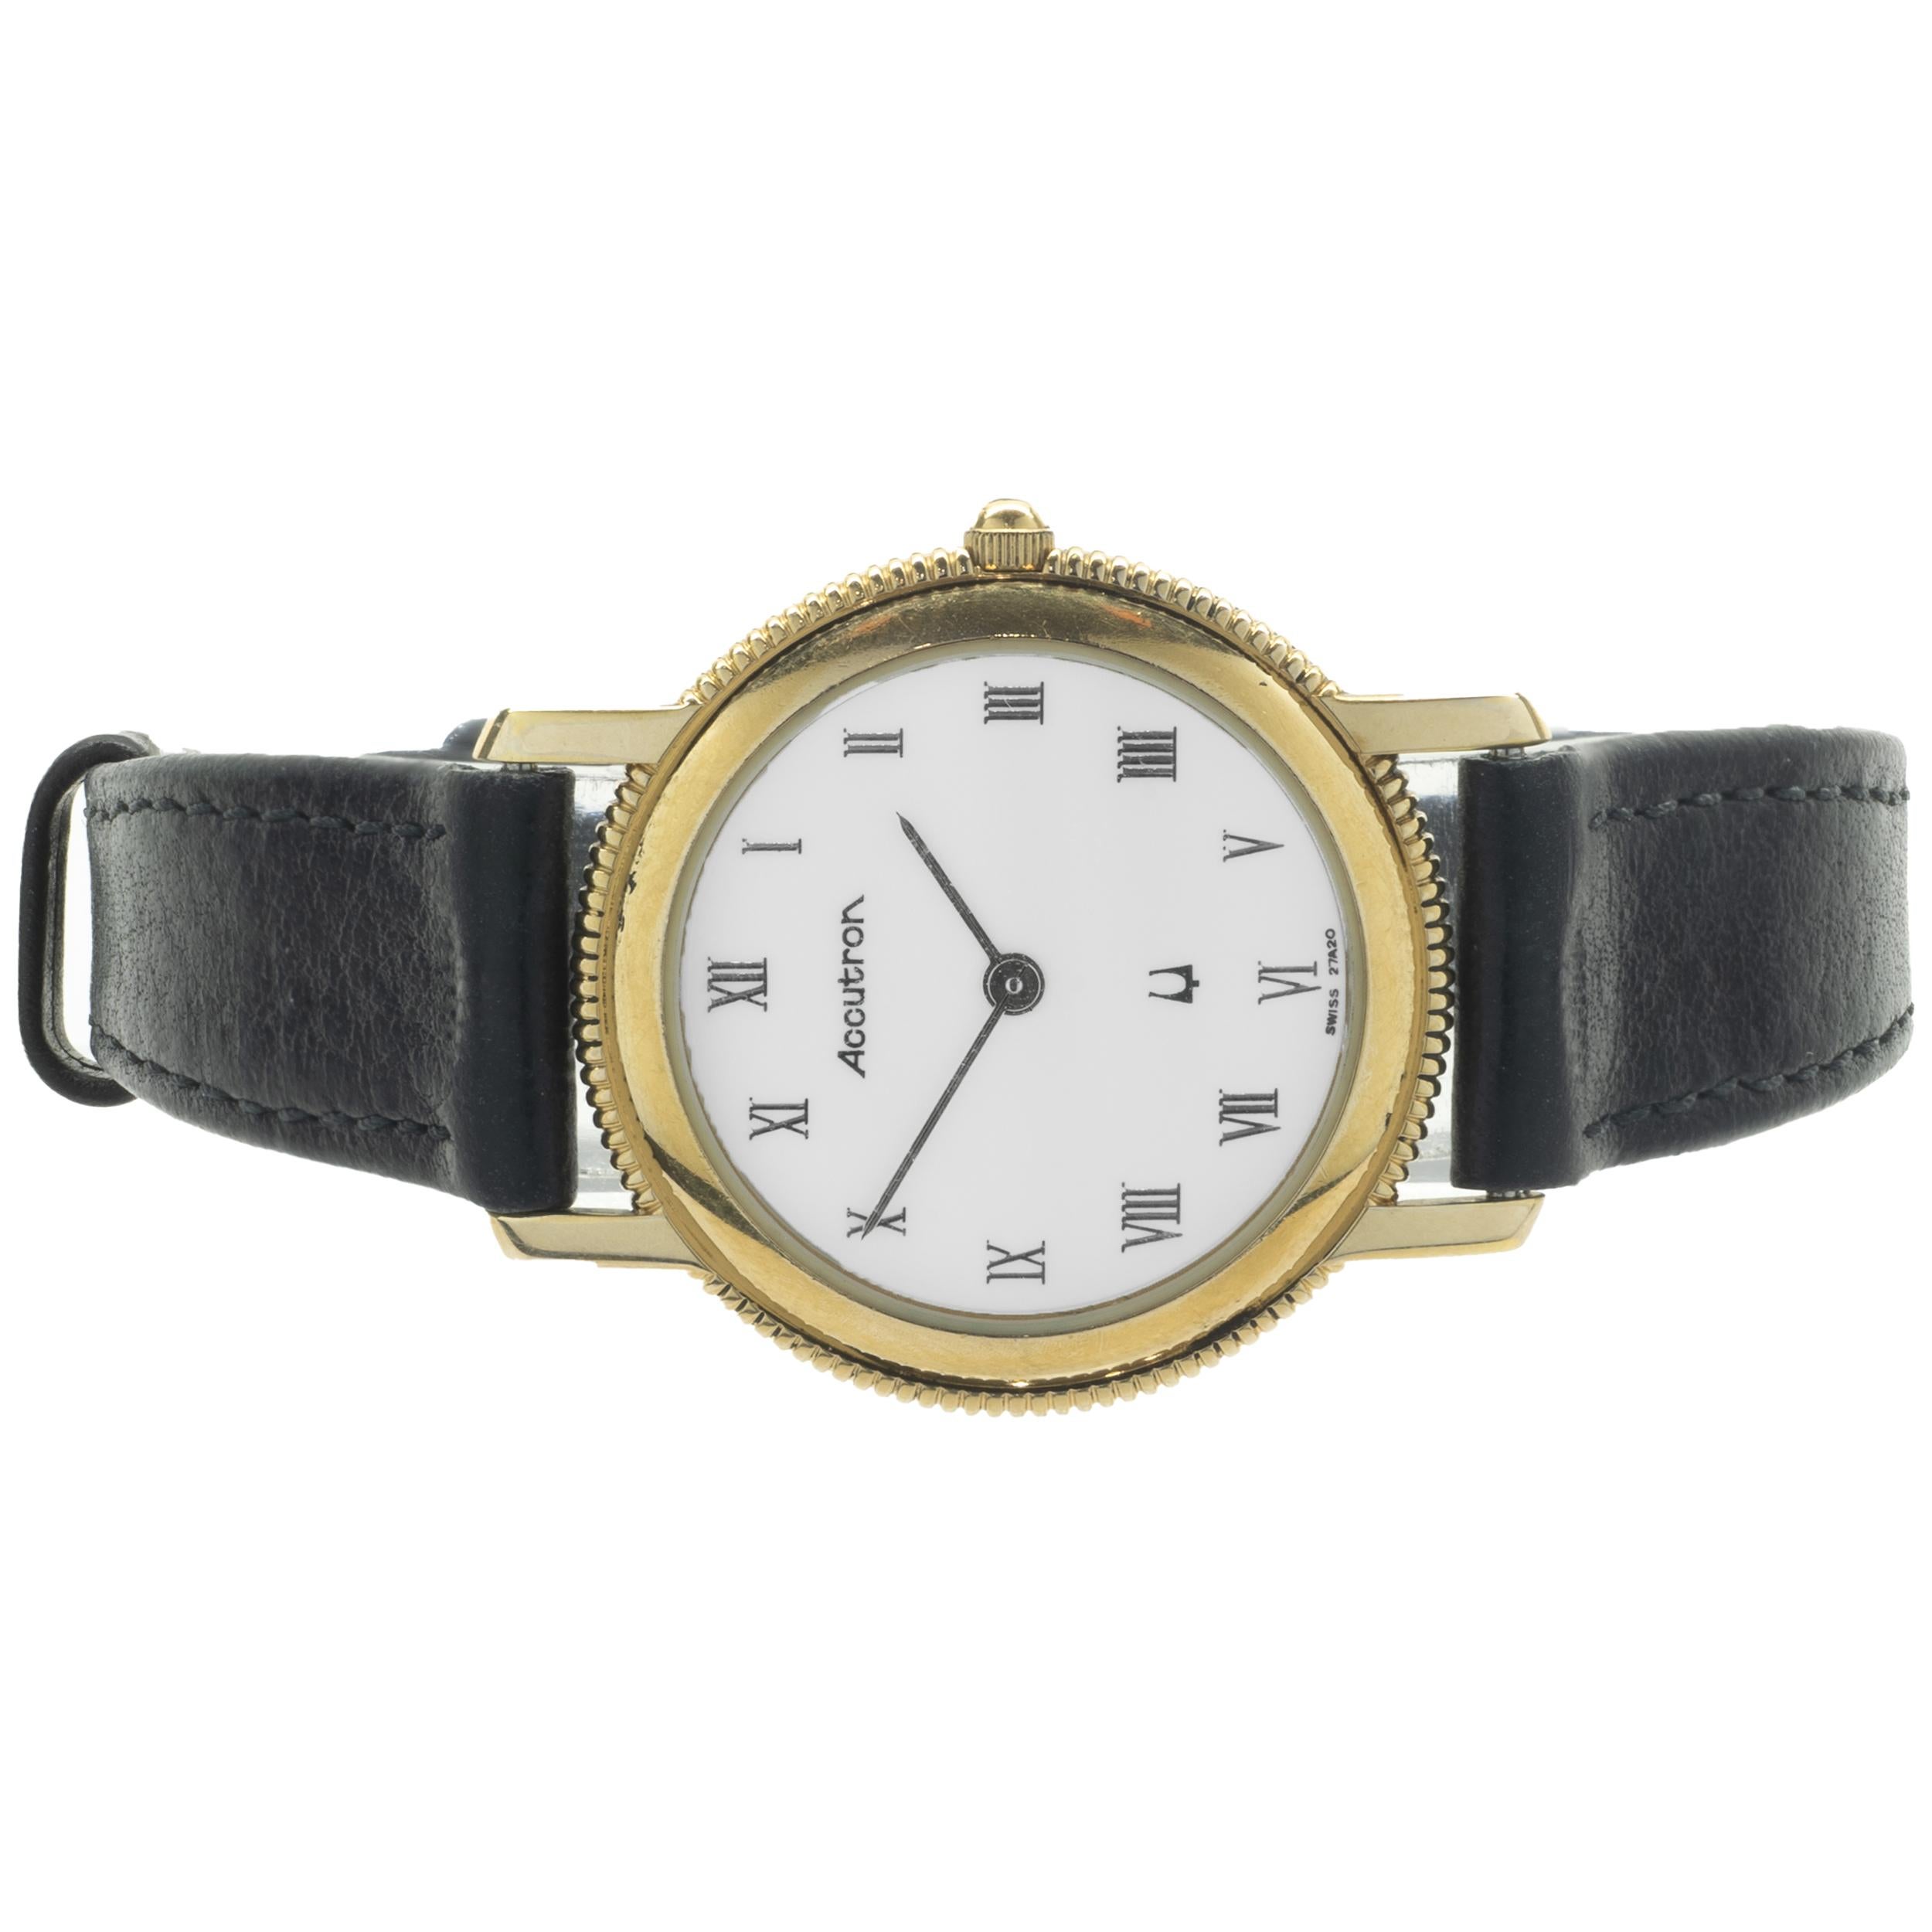 Movement: quartz
Function: hours, minutes
Case: 26mm yellow tone base metal case, sapphire protective crystal
Band: black leather strap with buckle
Dial: white roman dial
Serial: 576XXX

Complete with original box, no papers
Guaranteed to be